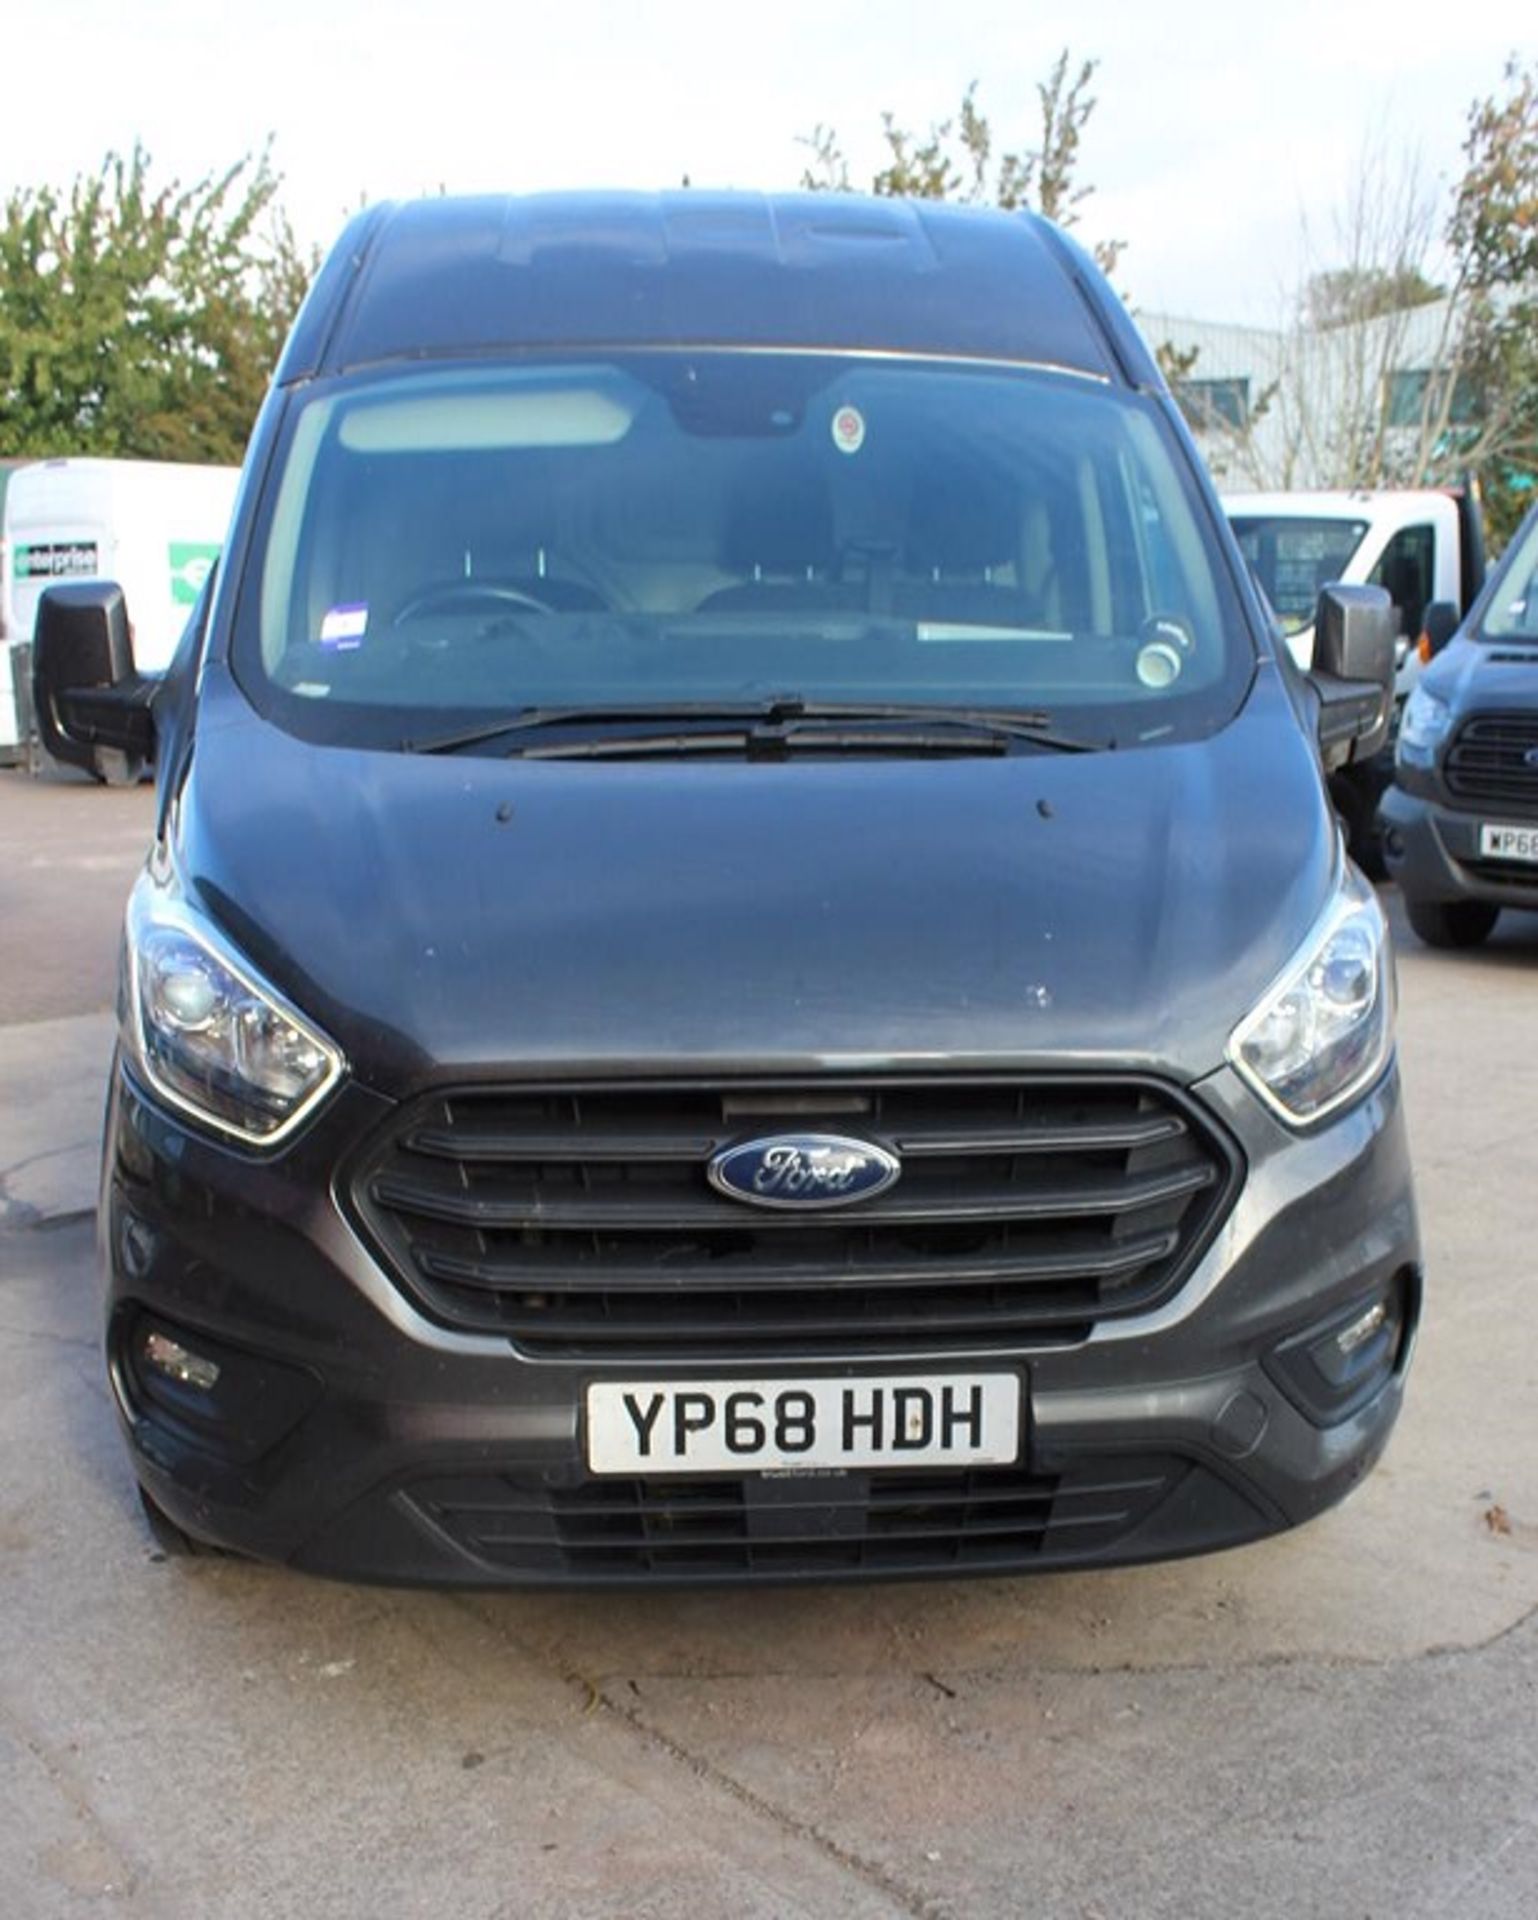 Ford Transit Custom 340 L2 Diesel FWD 2.0 TDCi 130PS high roof van, registration YP68 HDH, first - Image 2 of 10